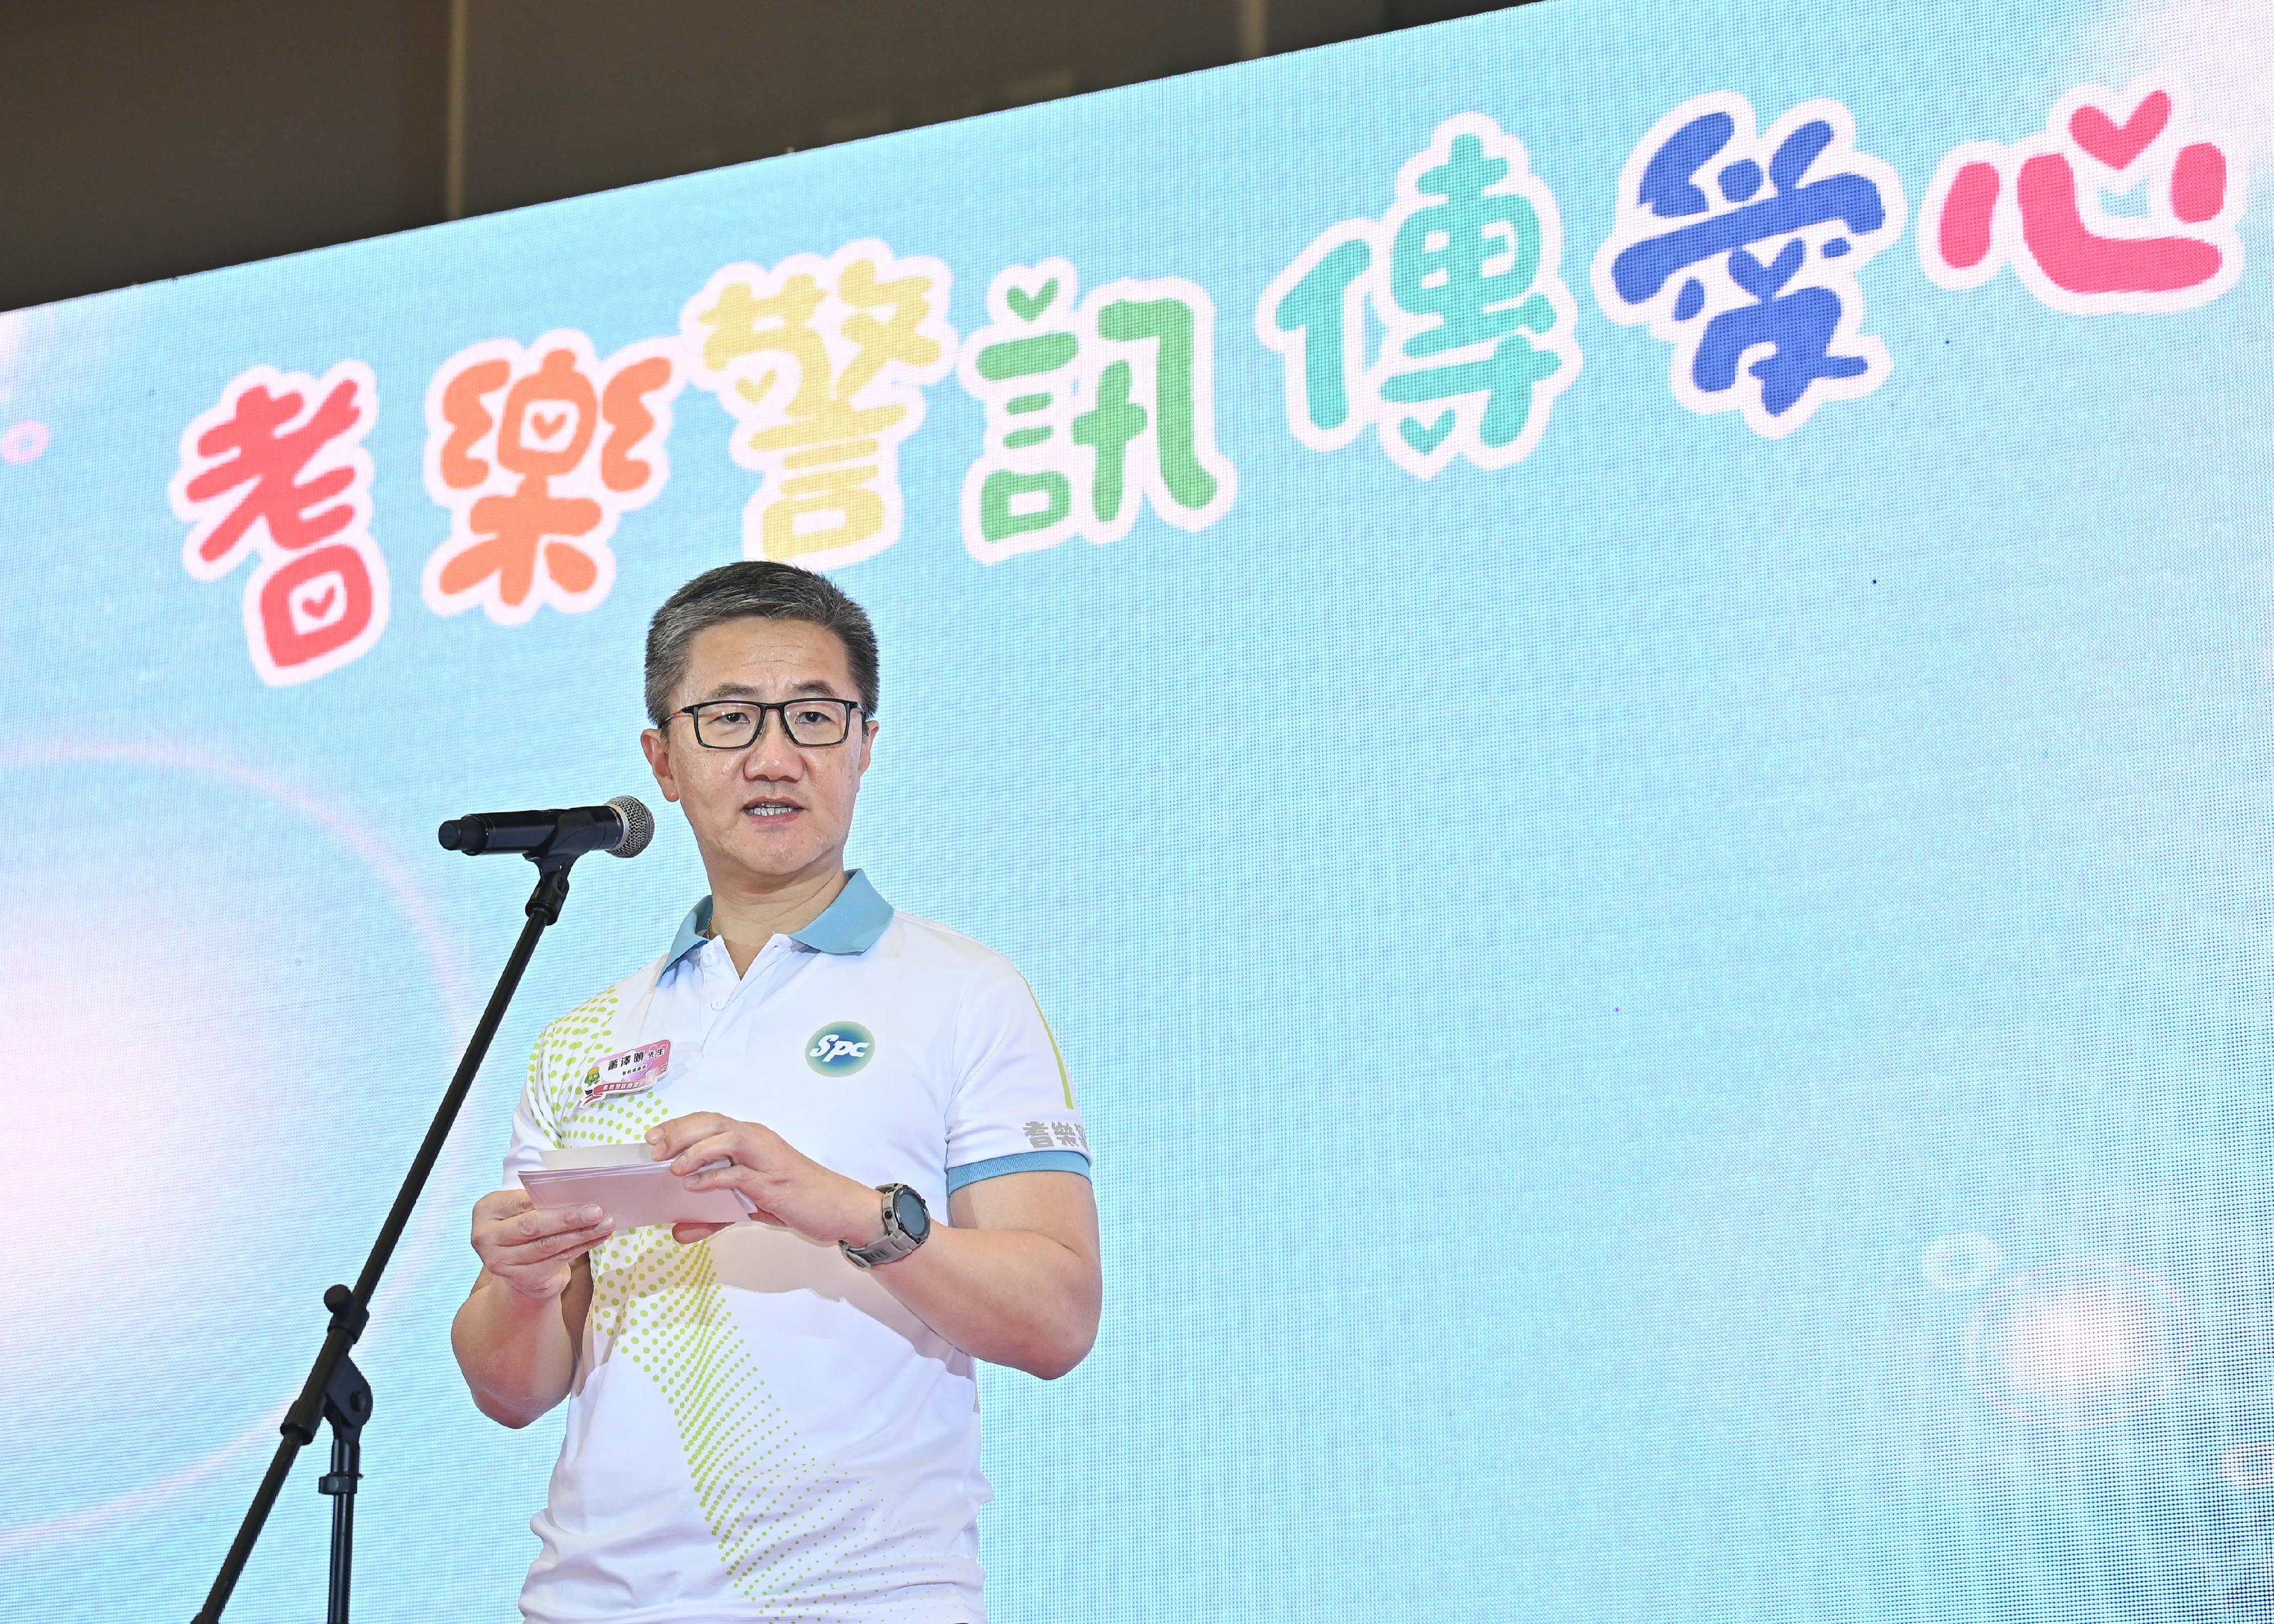 Senior Police Call (SPC) launched the “SPC Share the Love” today (May 13). Photo shows the Commissioner of Police, Mr Siu Chak-yee, speaking at the kick-off ceremony.